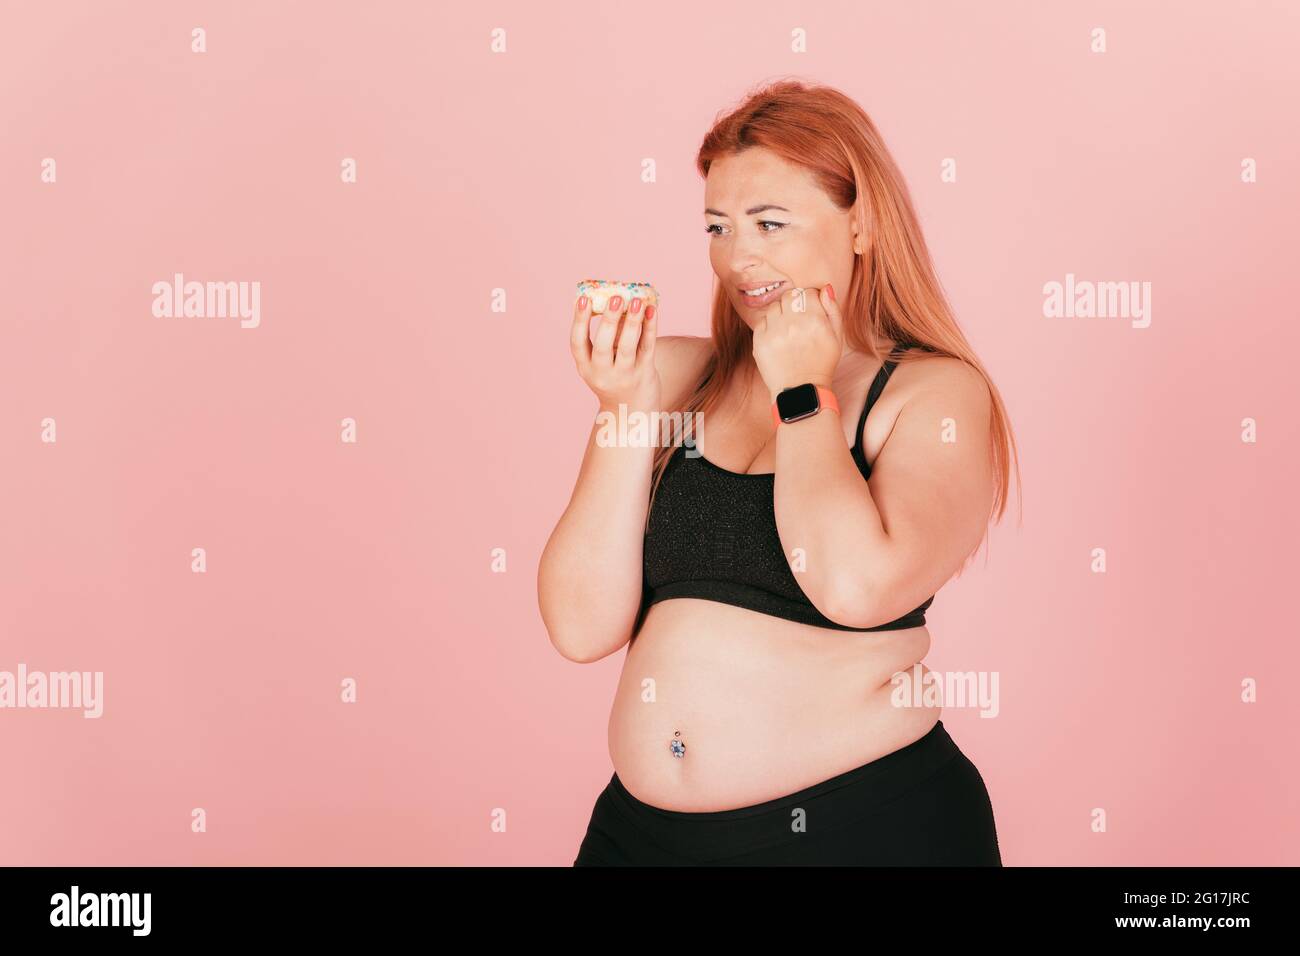 Oversized young woman wearing sports outfit looks at sweet donut junk food doubts but wants to eat dessert, standing on pink background, copy space. Stock Photo